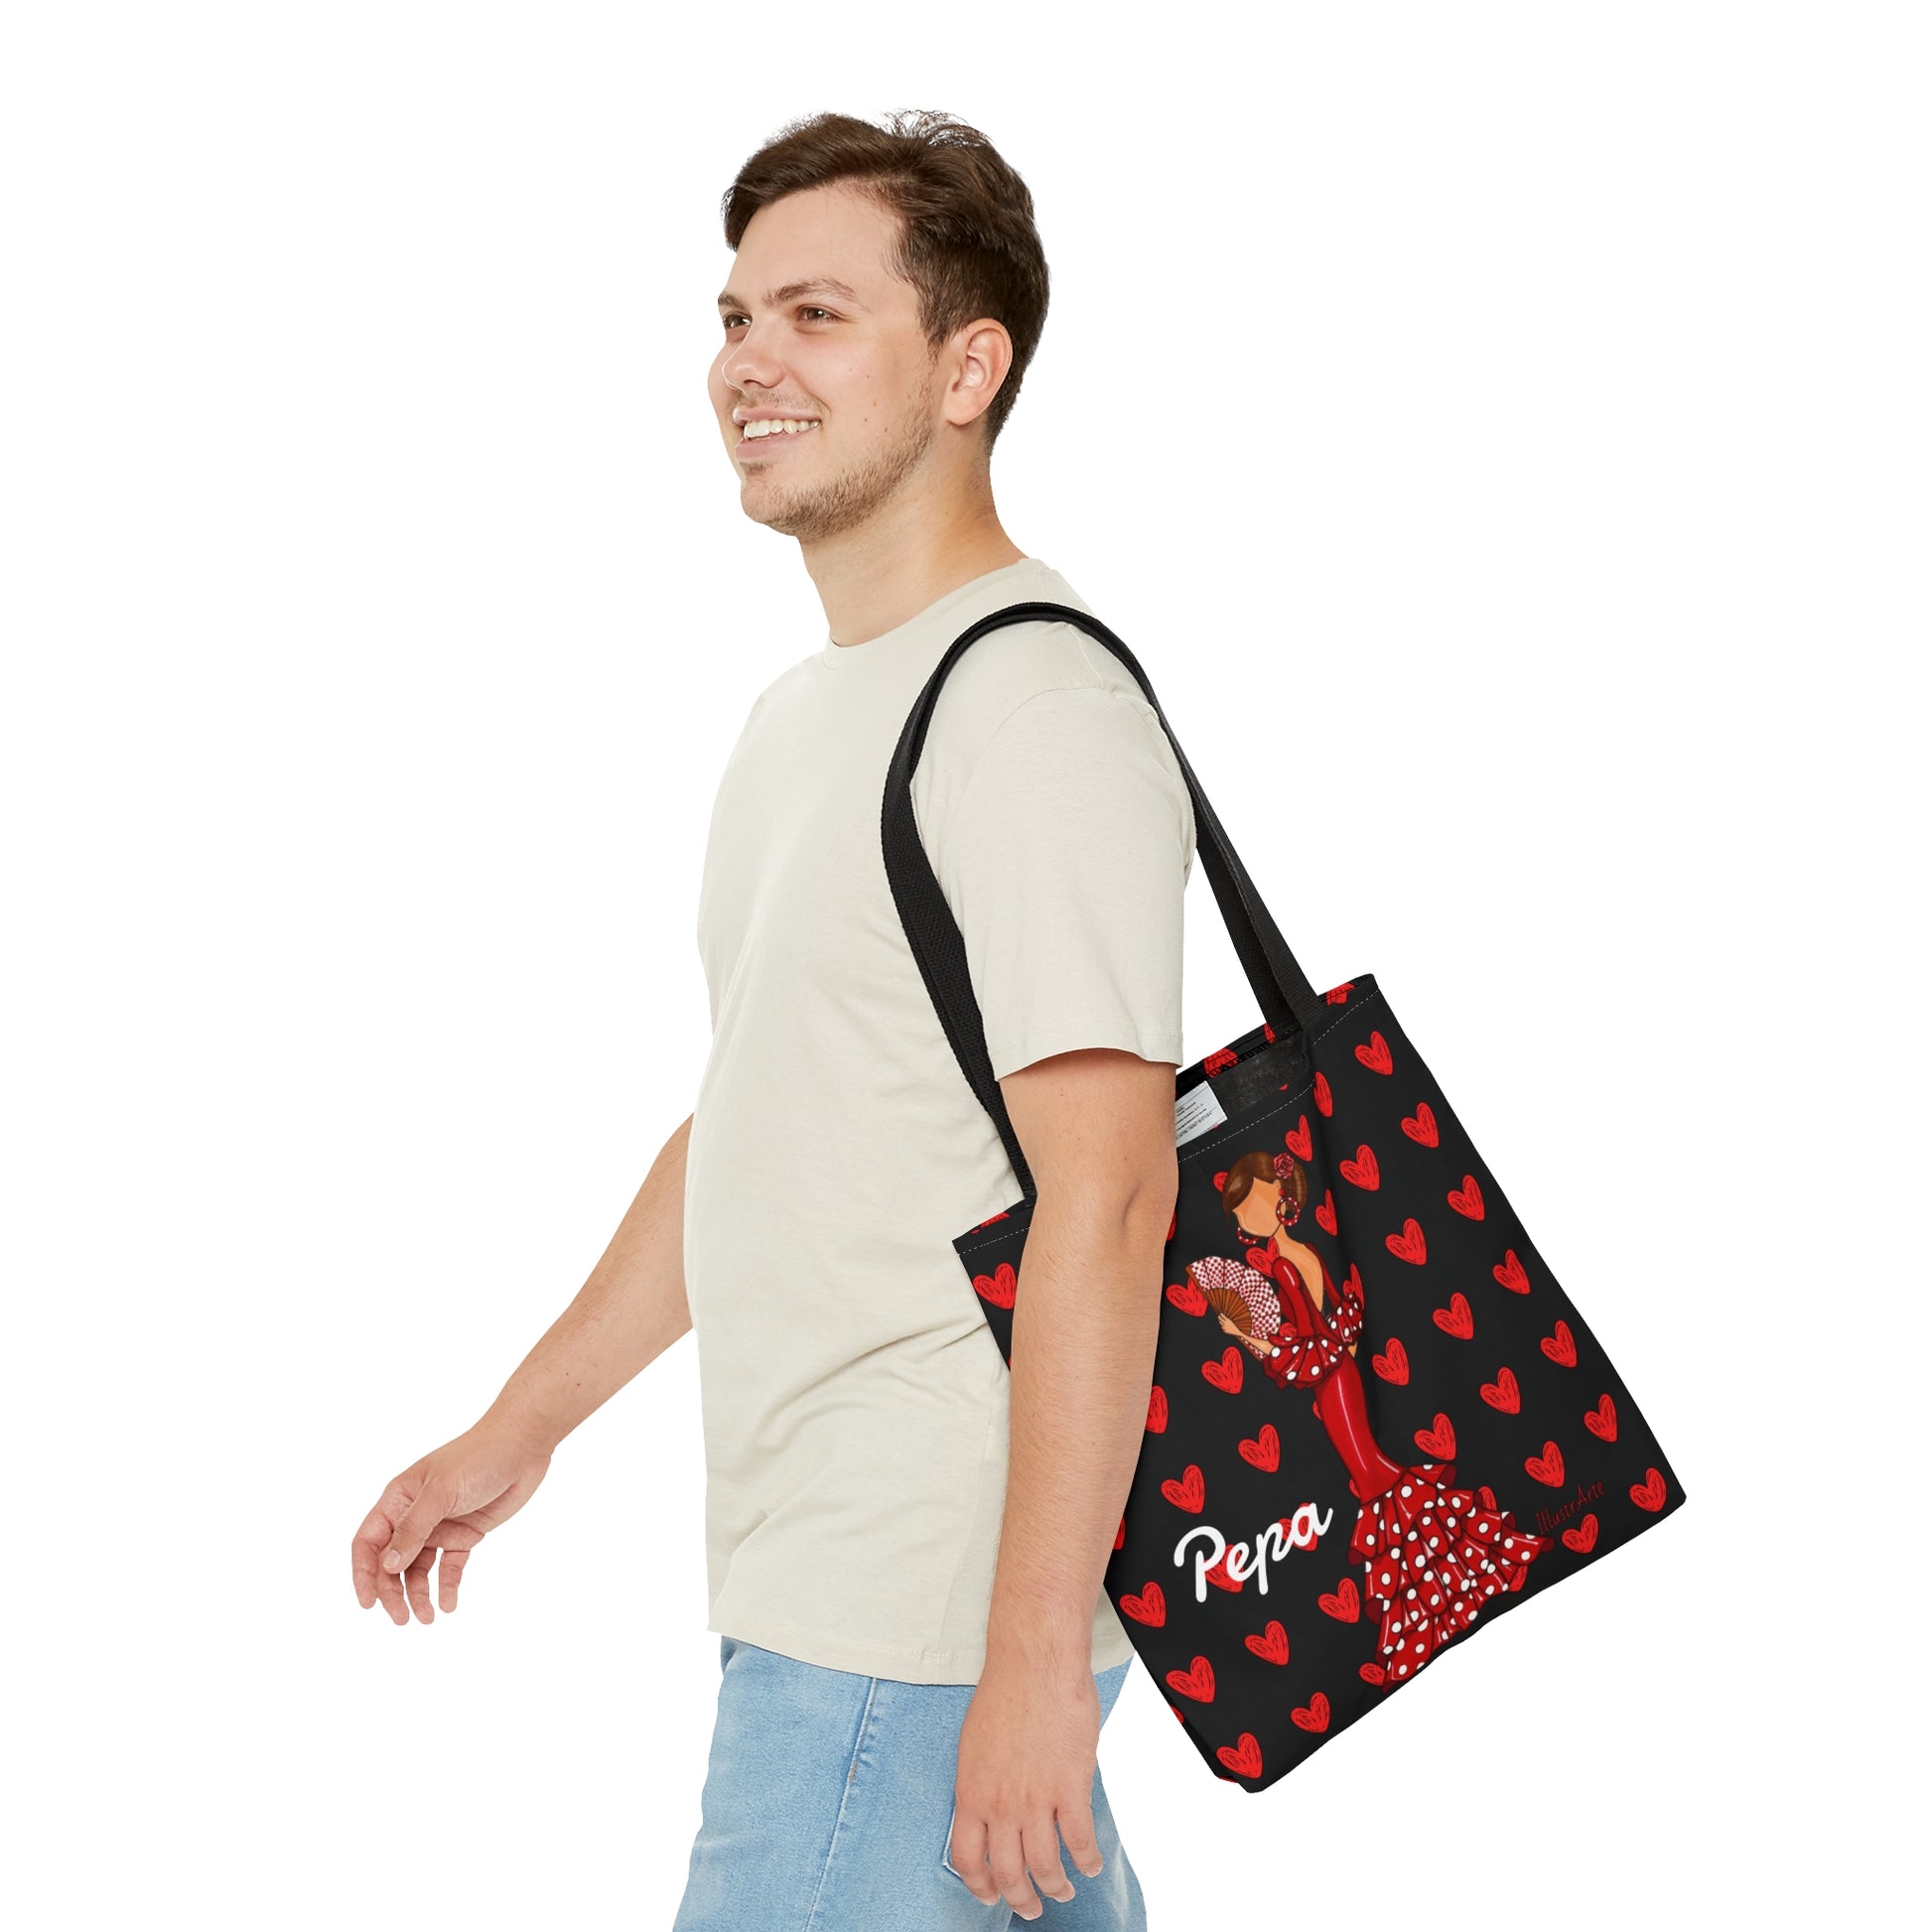 a man carrying a large bag with hearts on it